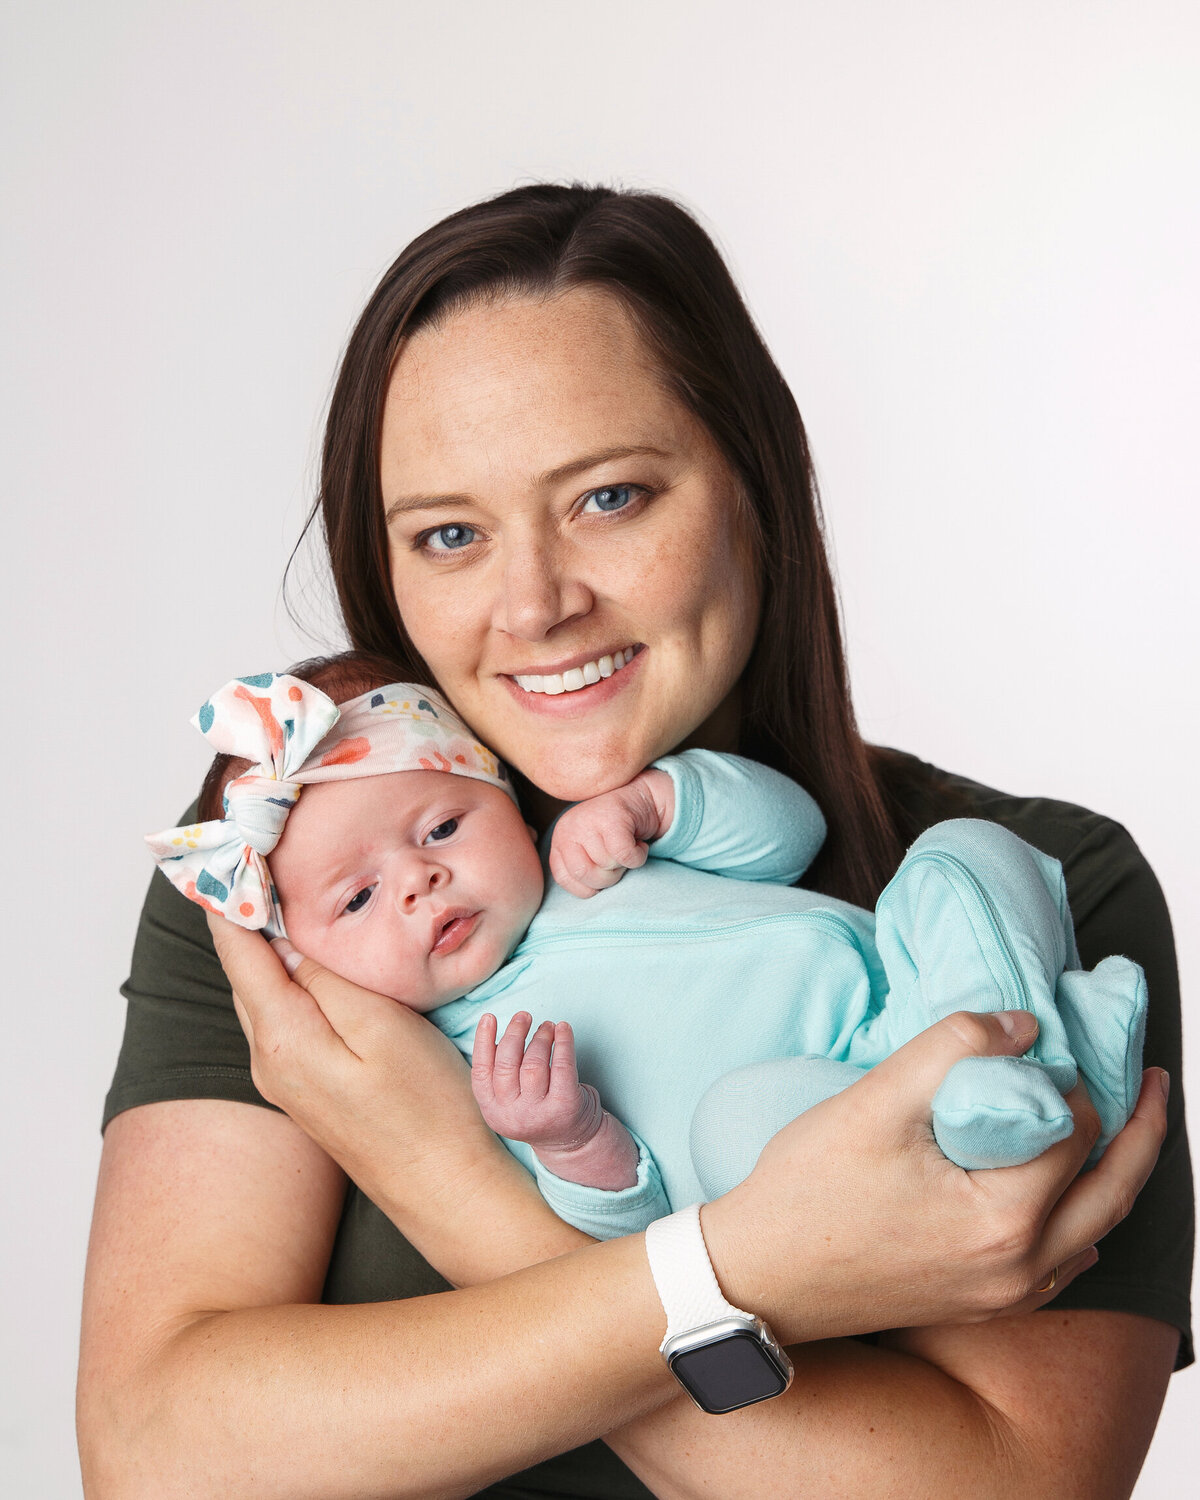 Mom holding her newborn baby girl posed on a white background